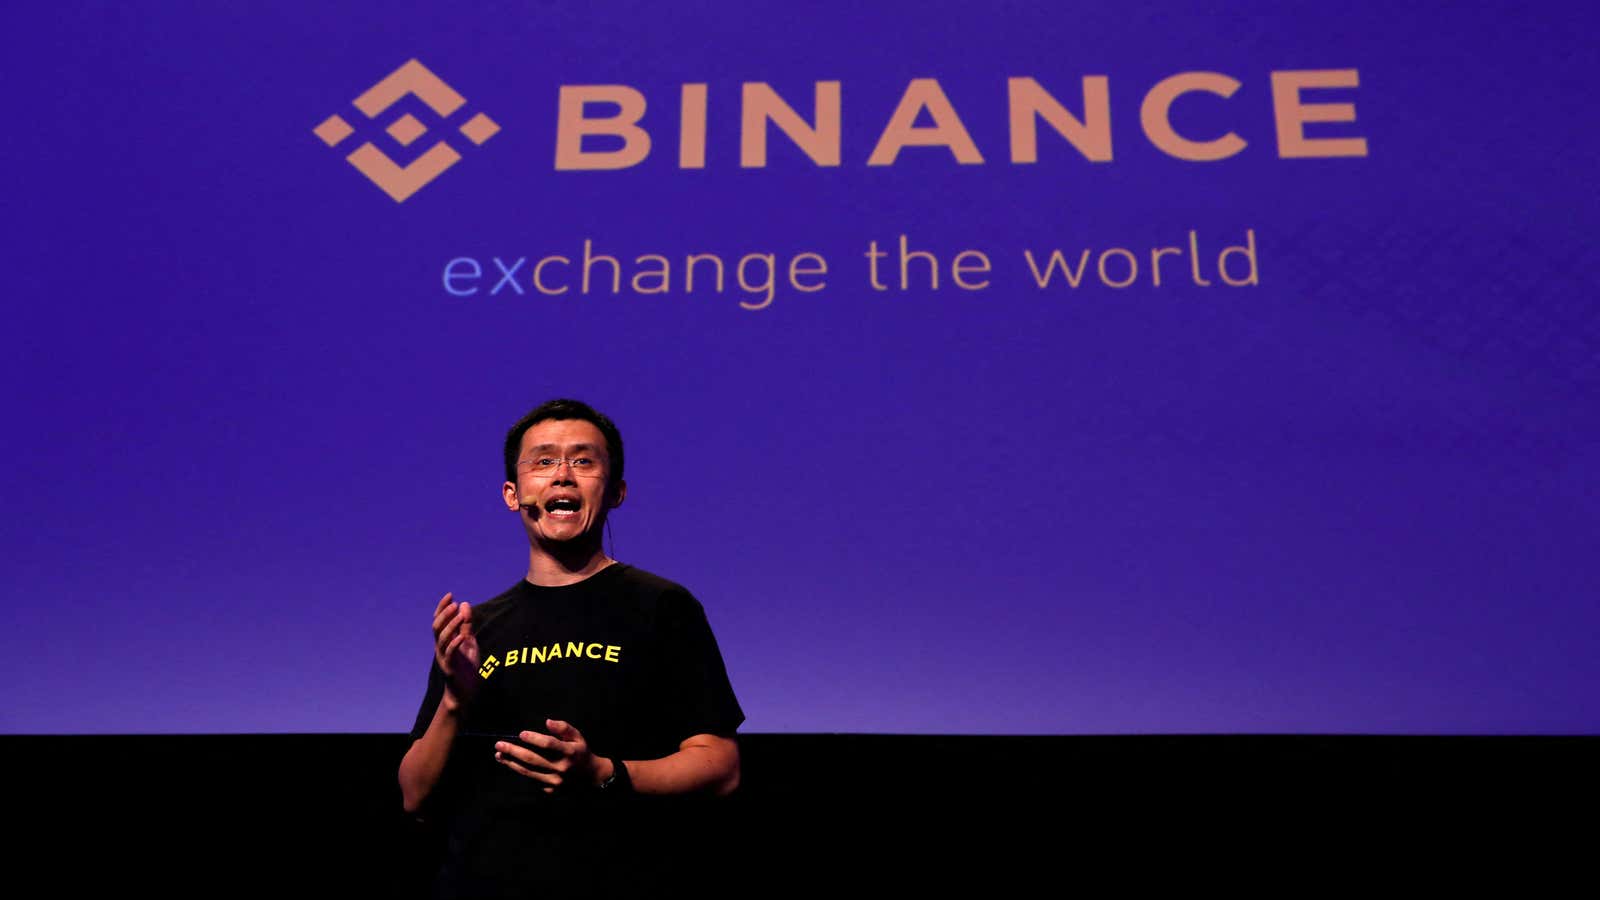 Binance founder and CEO Changpeng Zhao says that the Nigerian accounts were restricted at the request of international law enforcement.